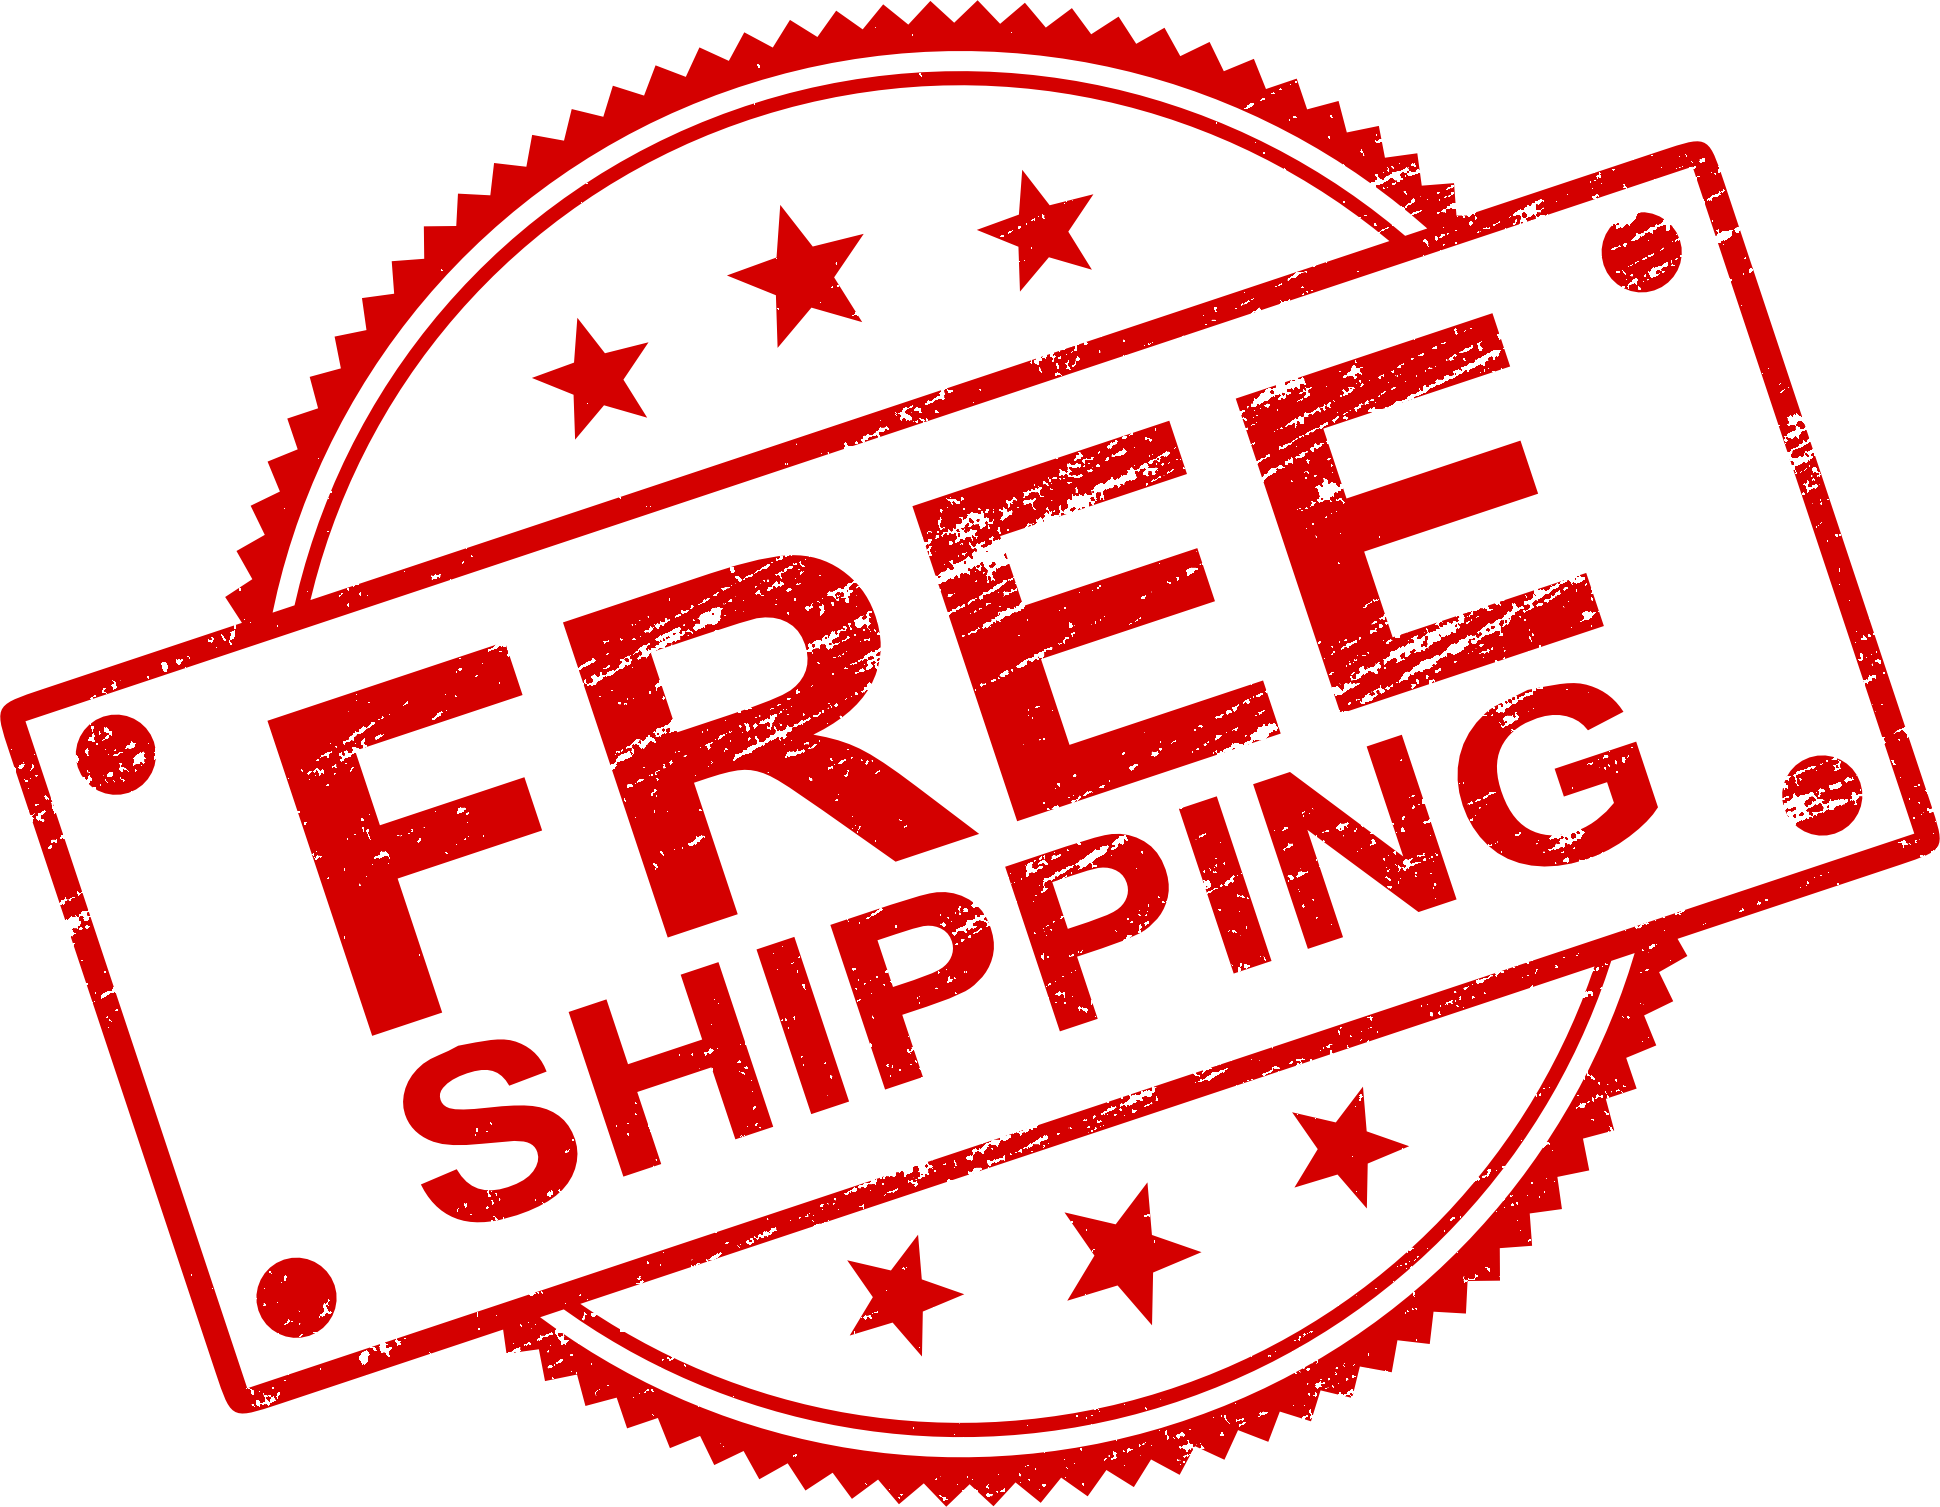 Free Shipping Png - Free Download (Free Shipping Stamp 4.png), Transparent background PNG HD thumbnail